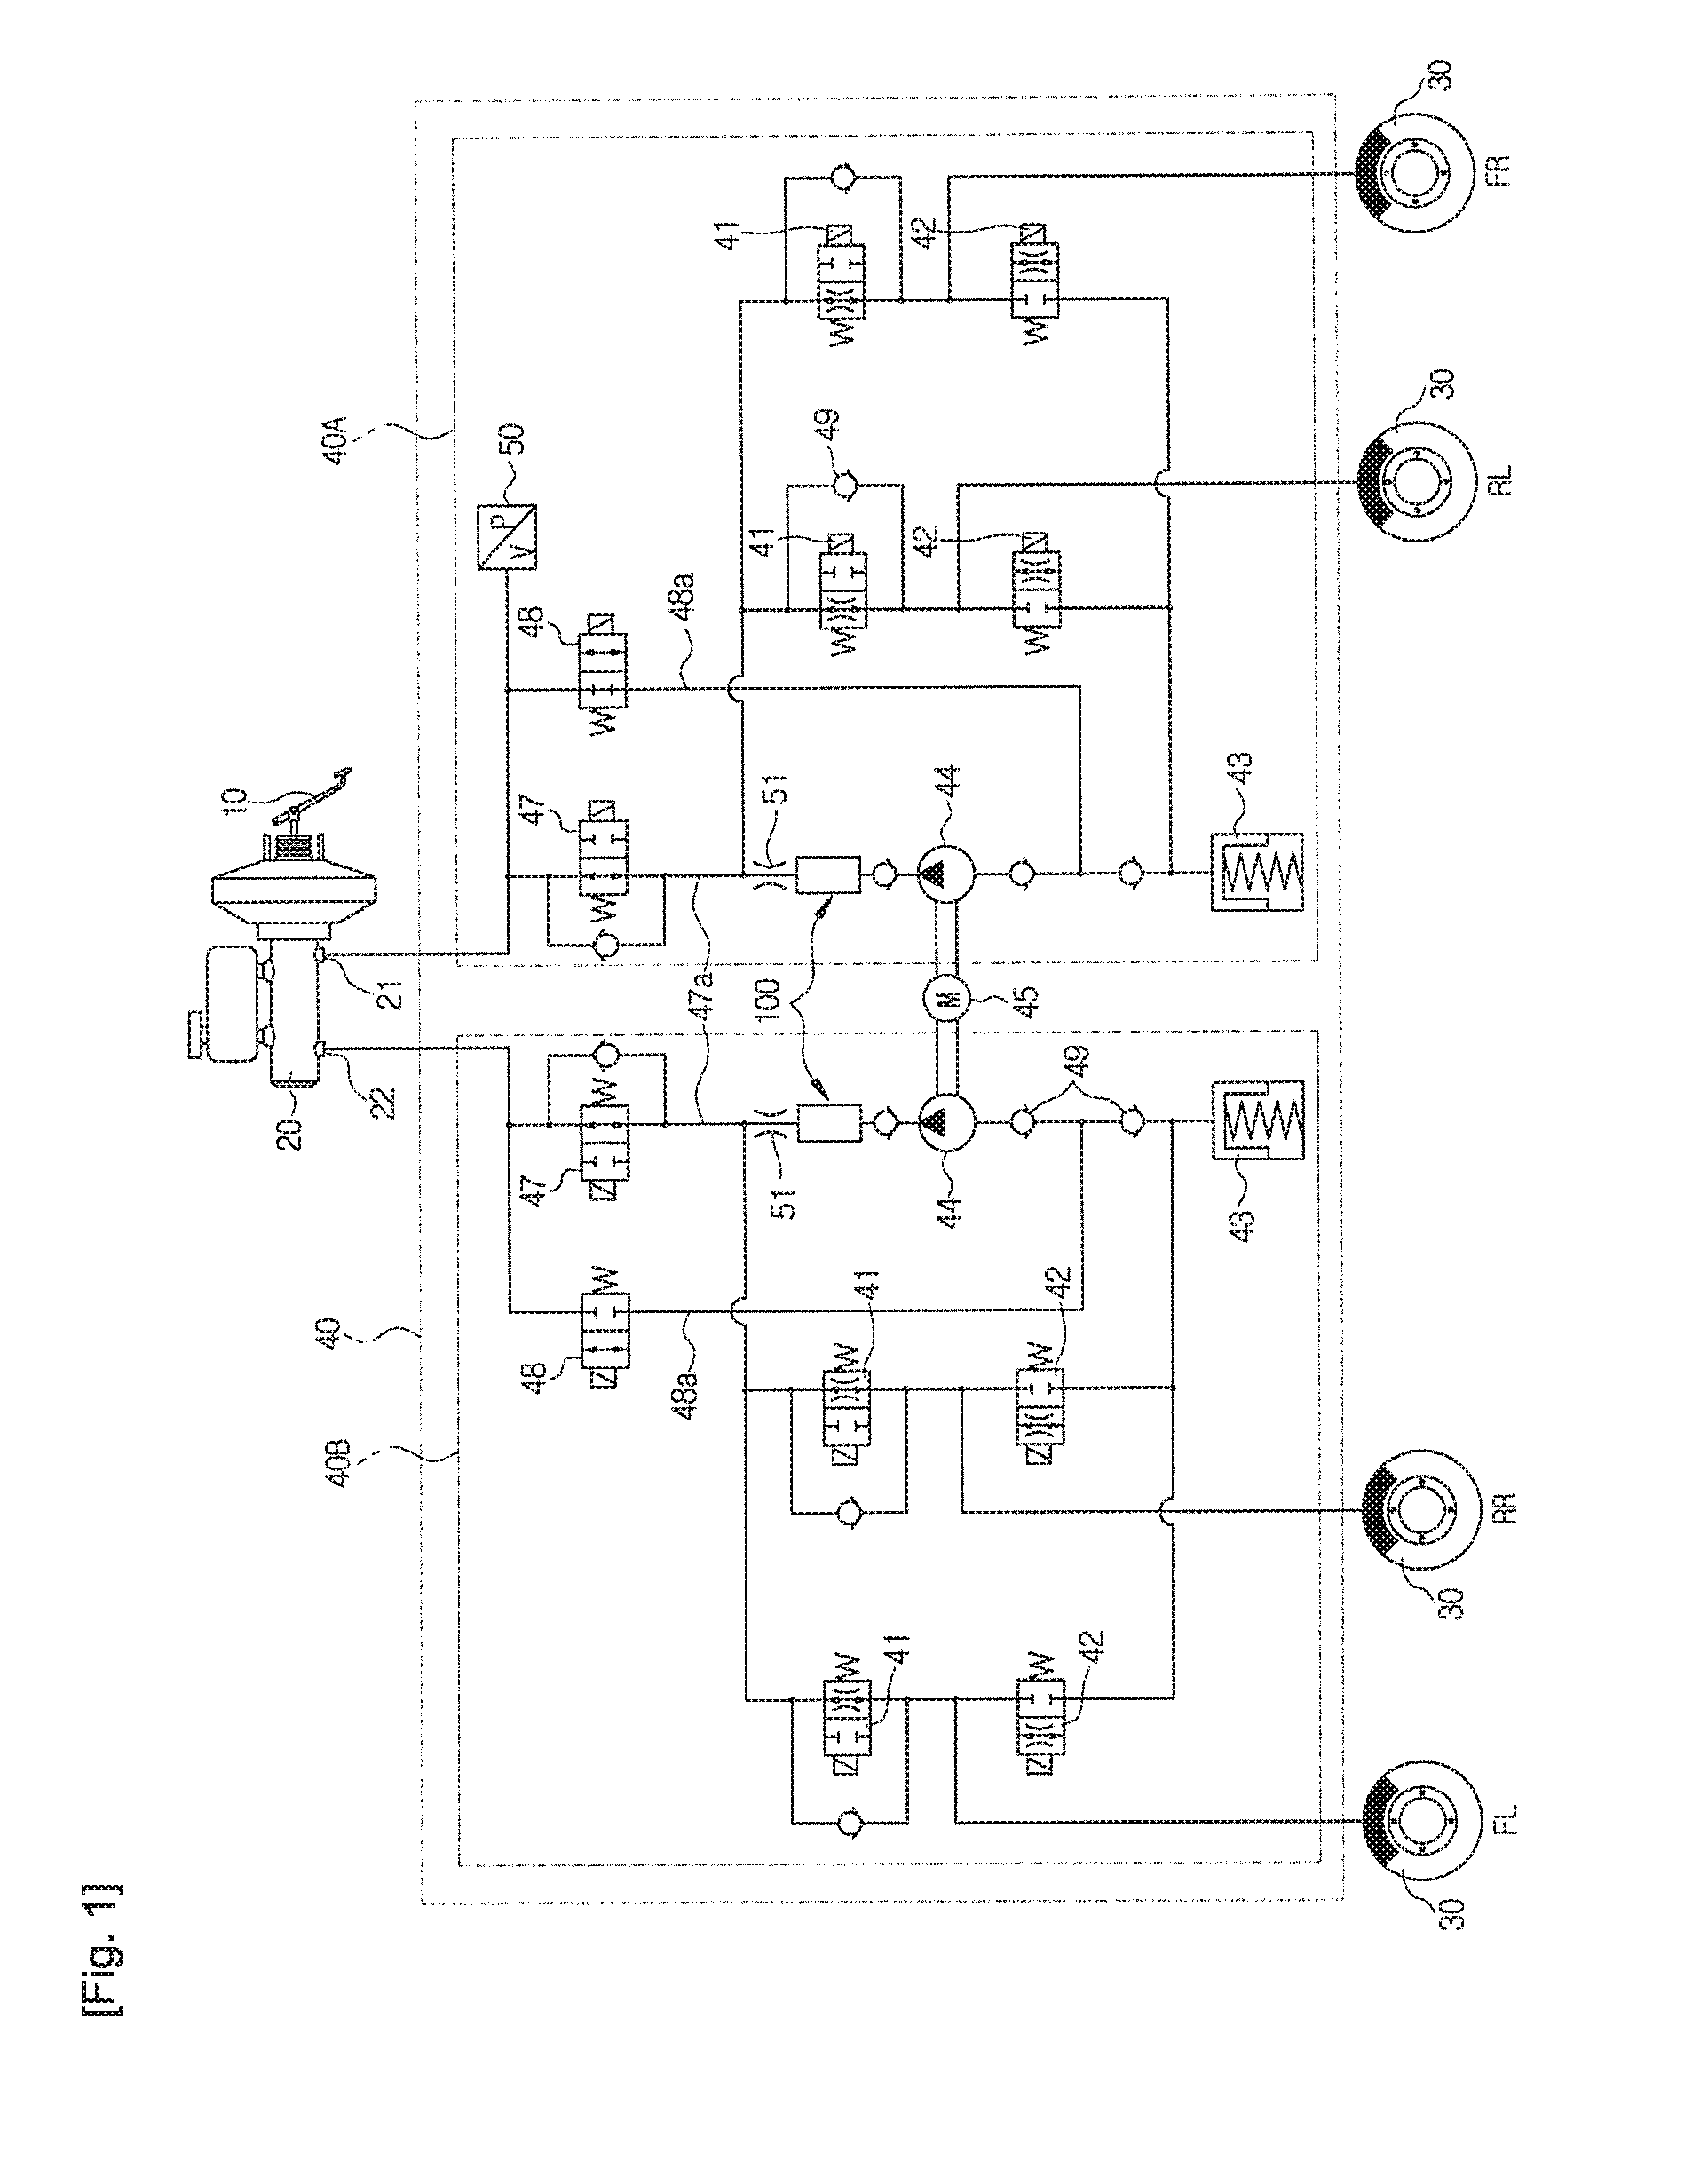 Pulsation damping device of hydraulic brake system